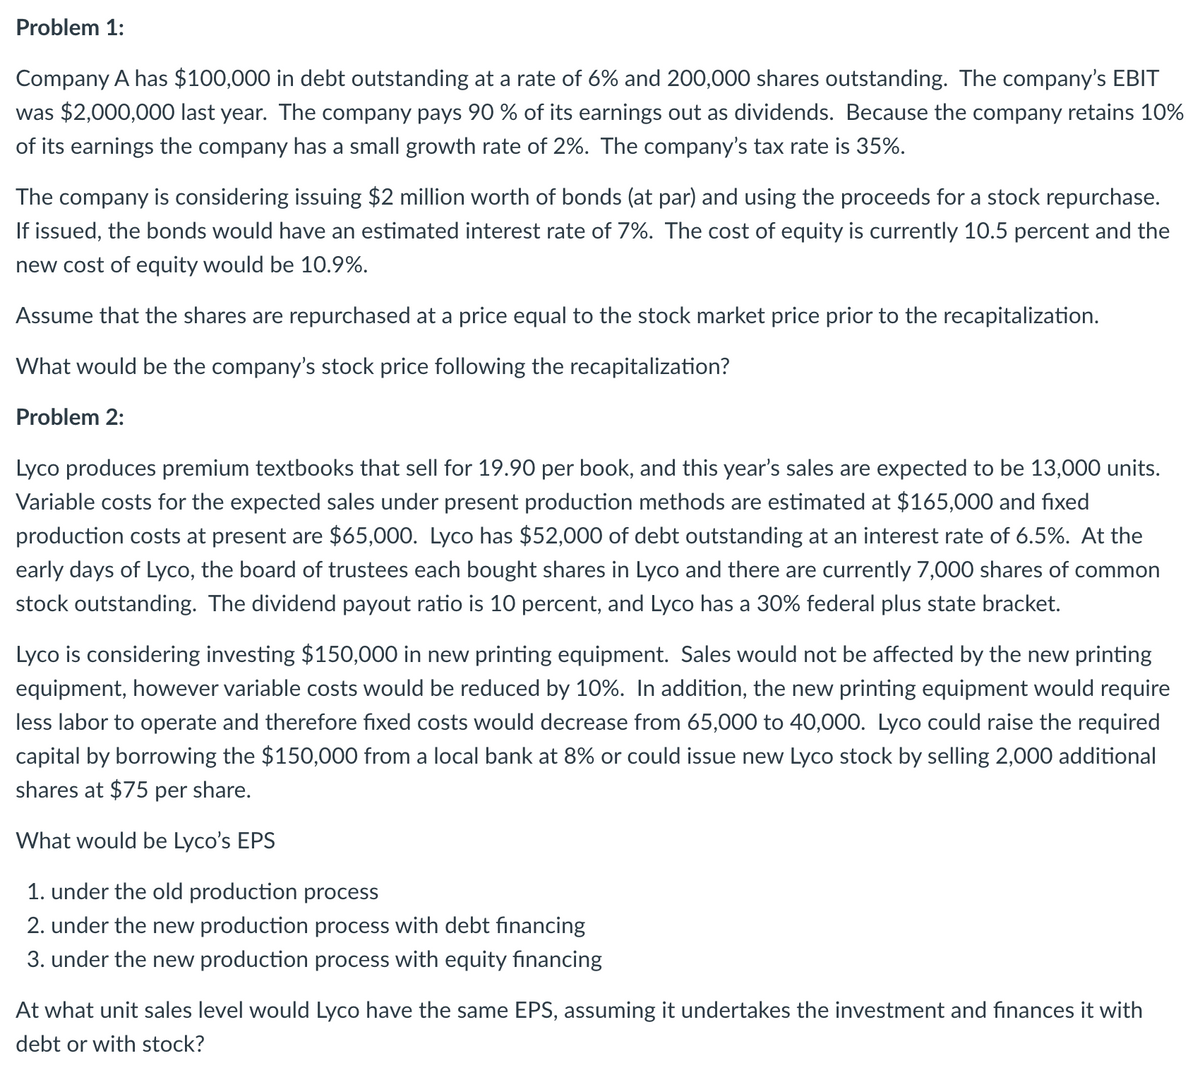 Problem 1:
Company A has $100,000 in debt outstanding at a rate of 6% and 200,000 shares outstanding. The company's EBIT
was $2,000,000 last year. The company pays 90 % of its earnings out as dividends. Because the company retains 10%
of its earnings the company has a small growth rate of 2%. The company's tax rate is 35%.
The company is considering issuing $2 million worth of bonds (at par) and using the proceeds for a stock repurchase.
If issued, the bonds would have an estimated interest rate of 7%. The cost of equity is currently 10.5 percent and the
new cost of equity would be 10.9%.
Assume that the shares are repurchased at a price equal to the stock market price prior to the recapitalization.
What would be the company's stock price following the recapitalization?
Problem 2:
Lyco produces premium textbooks that sell for 19.90 per book, and this year's sales are expected to be 13,000 units.
Variable costs for the expected sales under present production methods are estimated at $165,000 and fixed
production costs at present are $65,000. Lyco has $52,000 of debt outstanding at an interest rate of 6.5%. At the
early days of Lyco, the board of trustees each bought shares in Lyco and there are currently 7,000 shares of common
stock outstanding. The dividend payout ratio is 10 percent, and Lyco has a 30% federal plus state bracket.
Lyco is considering investing $150,000 in new printing equipment. Sales would not be affected by the new printing
equipment, however variable costs would be reduced by 10%. In addition, the new printing equipment would require
less labor to operate and therefore fixed costs would decrease from 65,000 to 40,000. Lyco could raise the required
capital by borrowing the $150,000 from a local bank at 8% or could issue new Lyco stock by selling 2,000 additional
shares at $75 per share.
What would be Lyco's EPS
1. under the old production process
2. under the new production process with debt financing
3. under the new production process with equity financing
At what unit sales level would Lyco have the same EPS, assuming it undertakes the investment and finances it with
debt or with stock?
